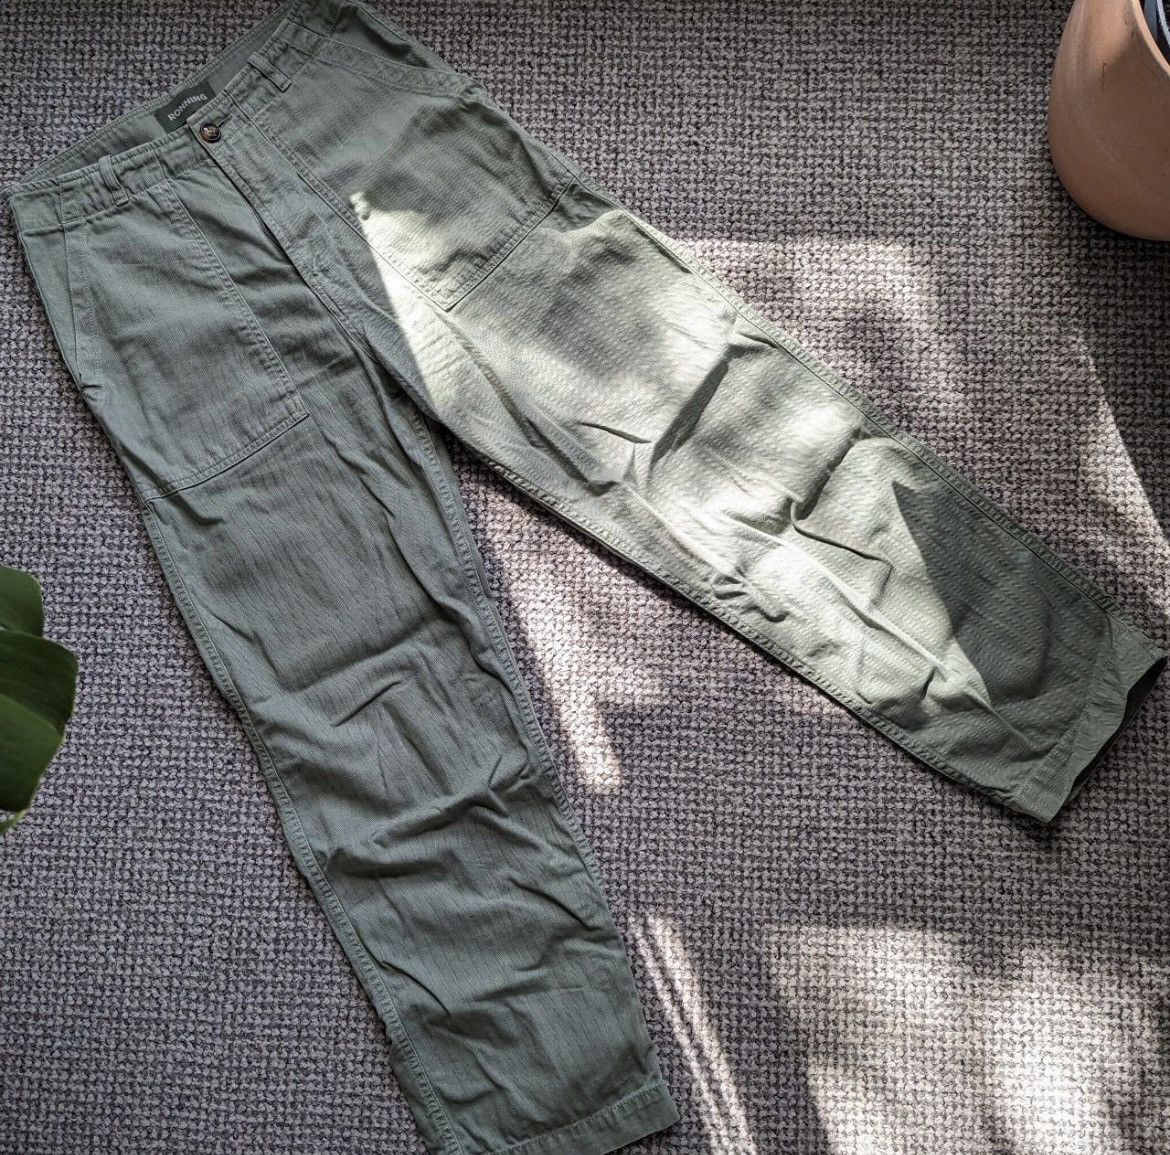 Ronning Ronning Everyday Fatigue pant - Olive | Grailed